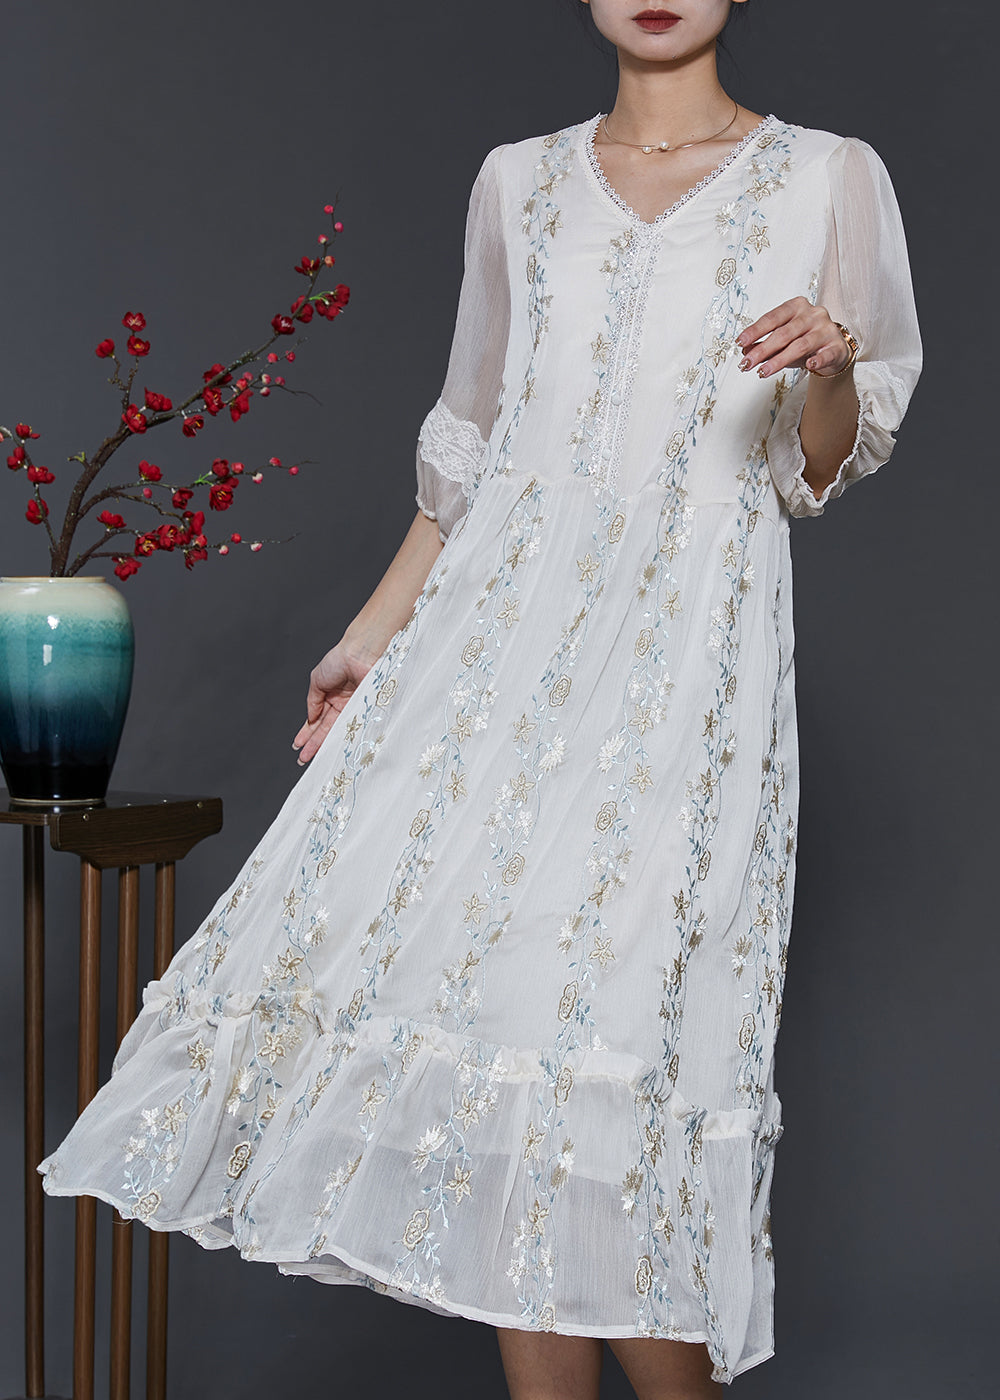 Boutique White Embroidered Patchwork Lace Silk Dresses Summer